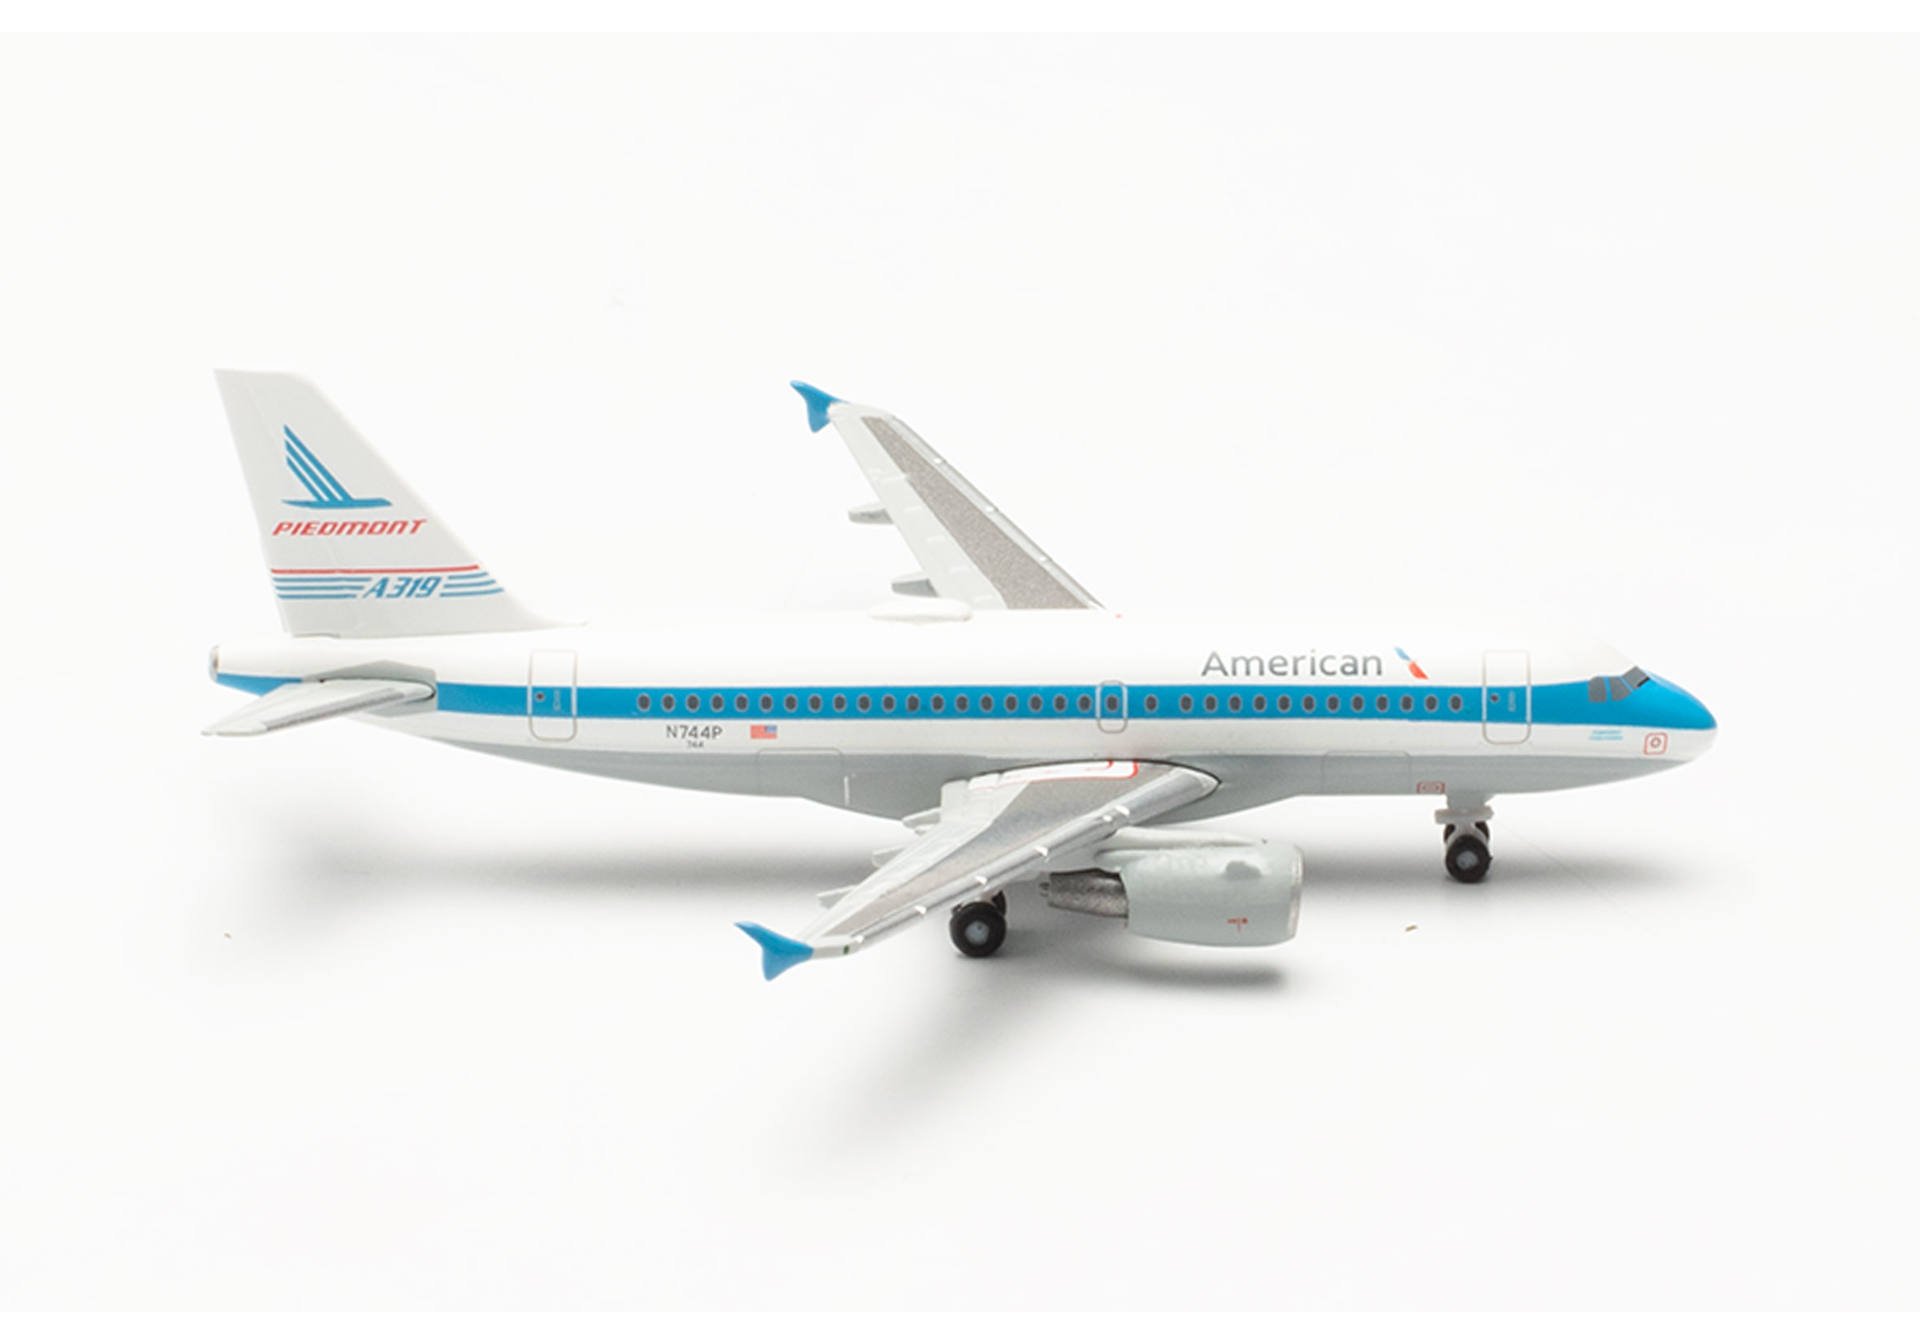 American Airlines Airbus A319 - Piedmont Heritage livery – N744P “Piedmont Pacemaker”